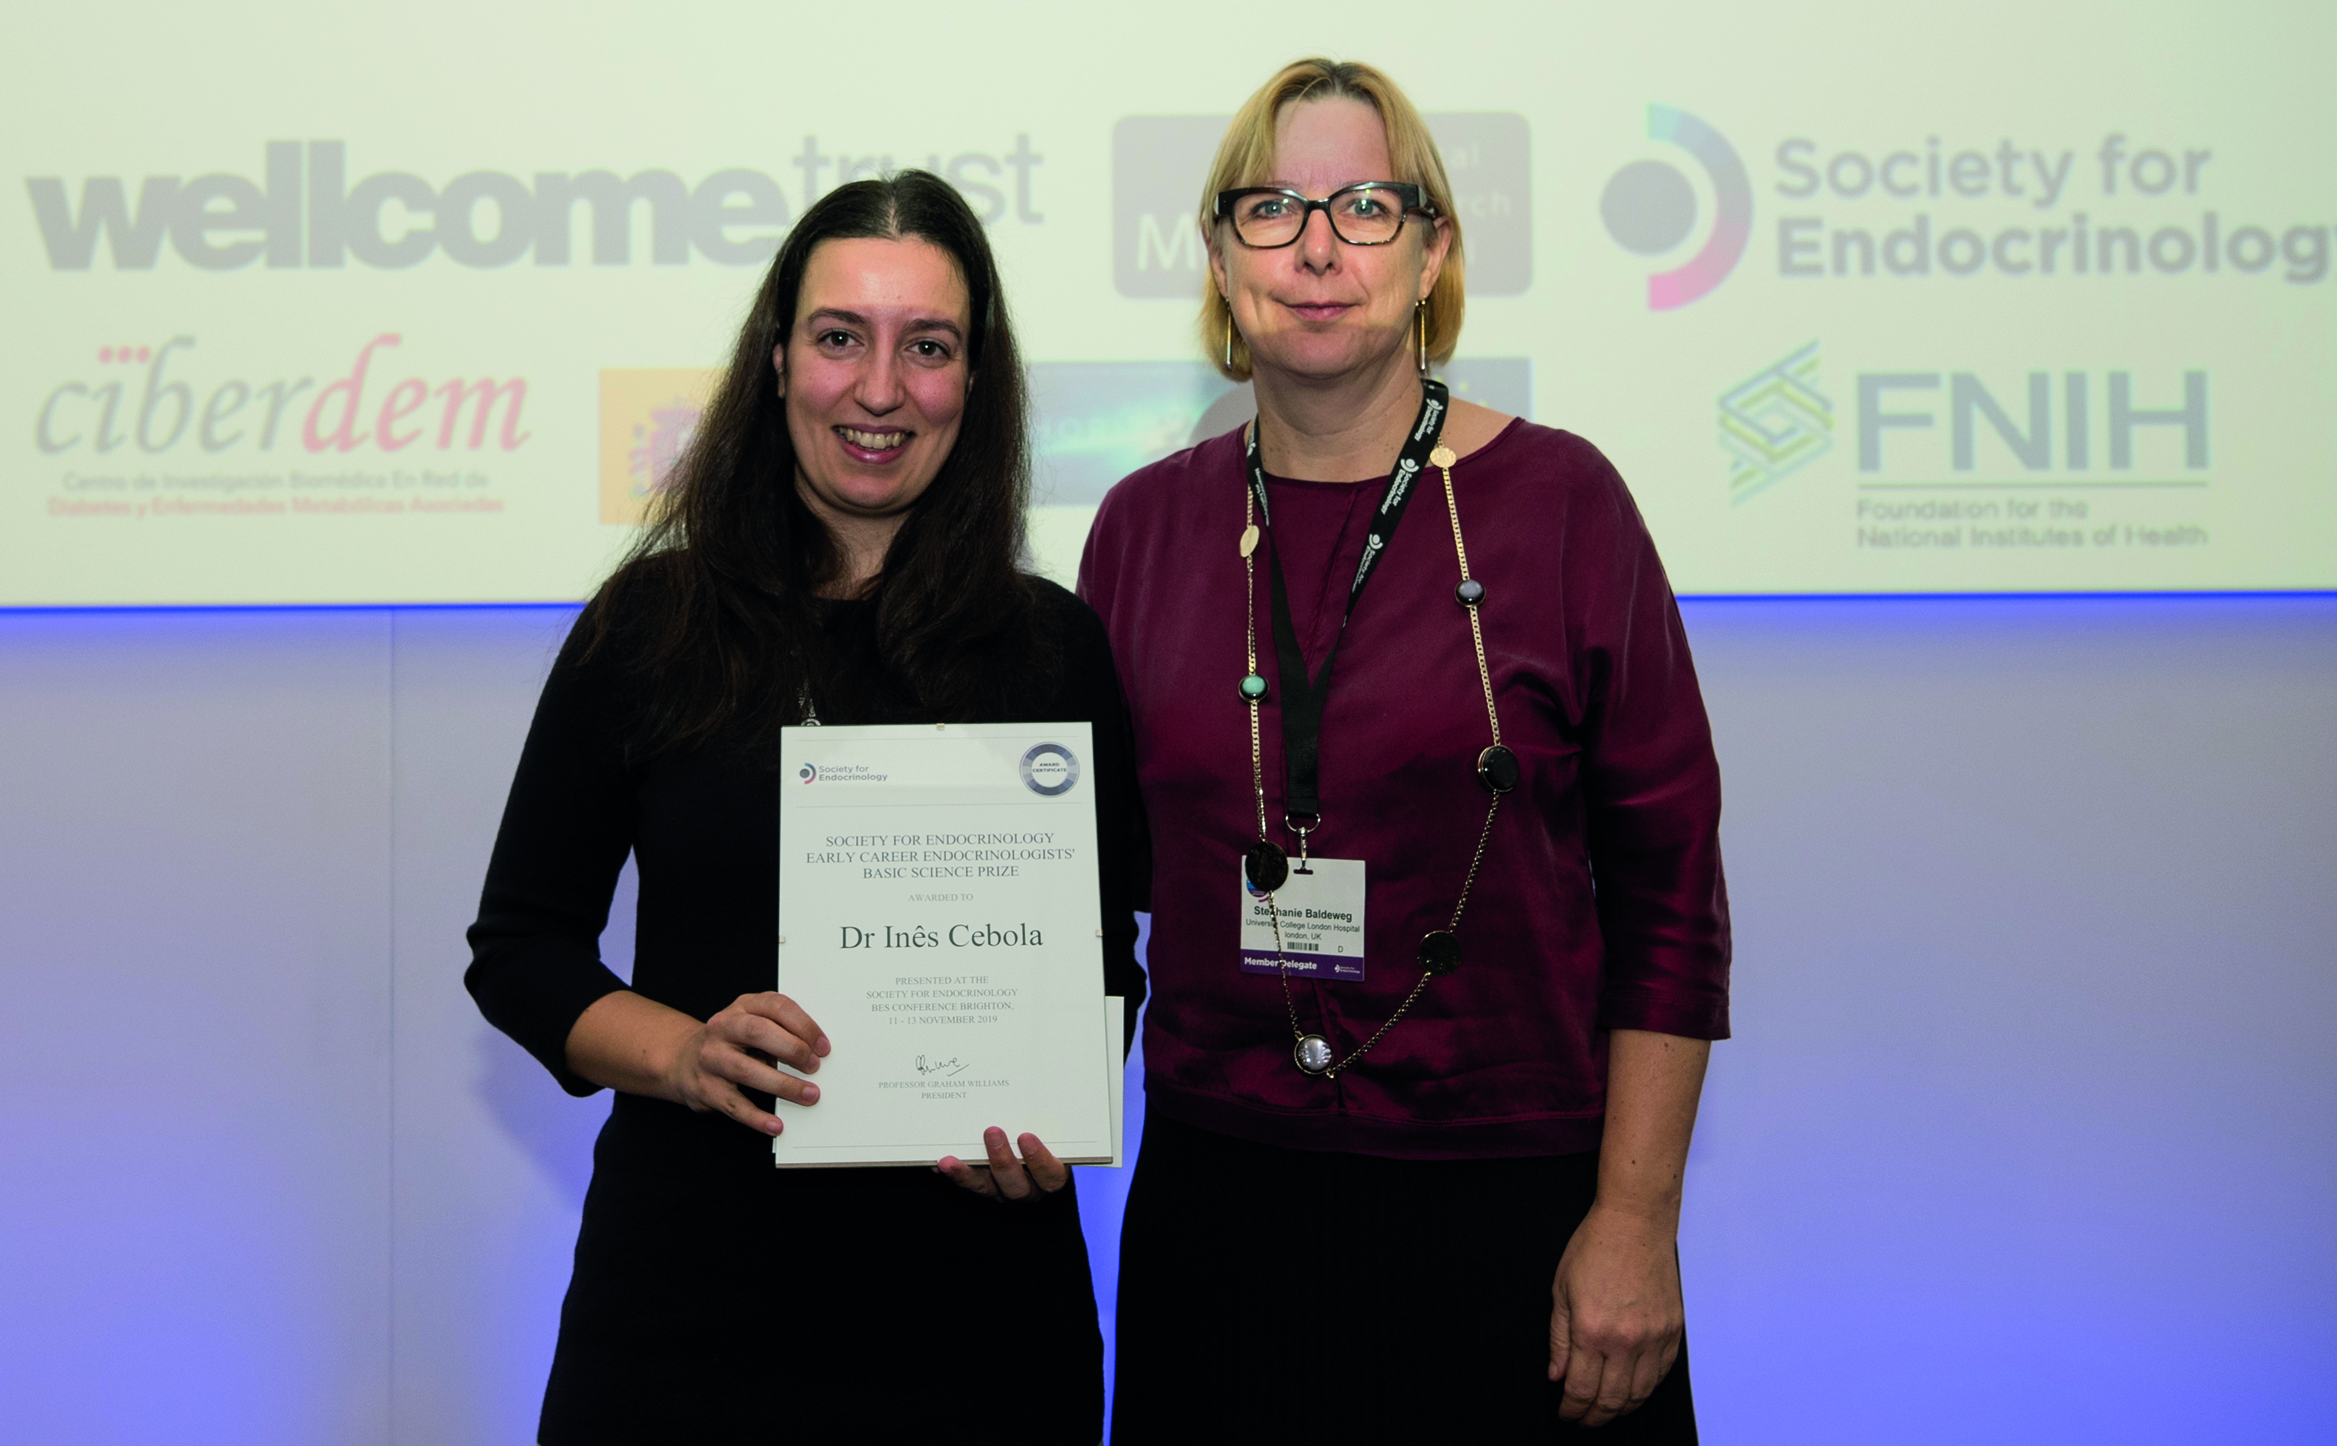 Ines Cebola, 2019 Science Prize Lecturer, receiving her award